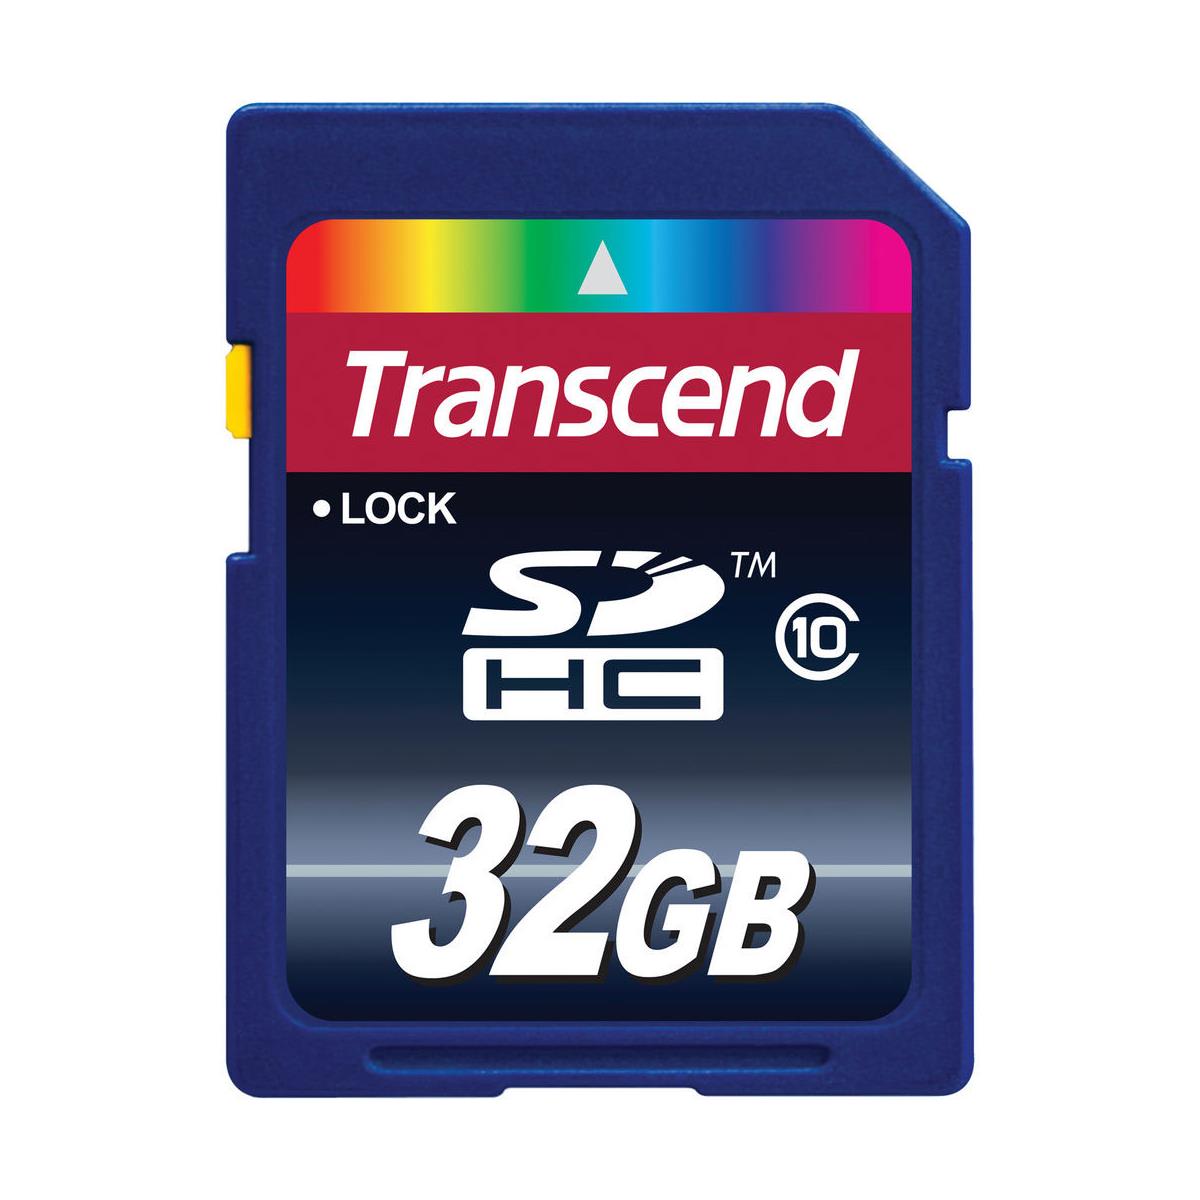 Image of Transcend 32GB Class 10 SDHC Memory Card